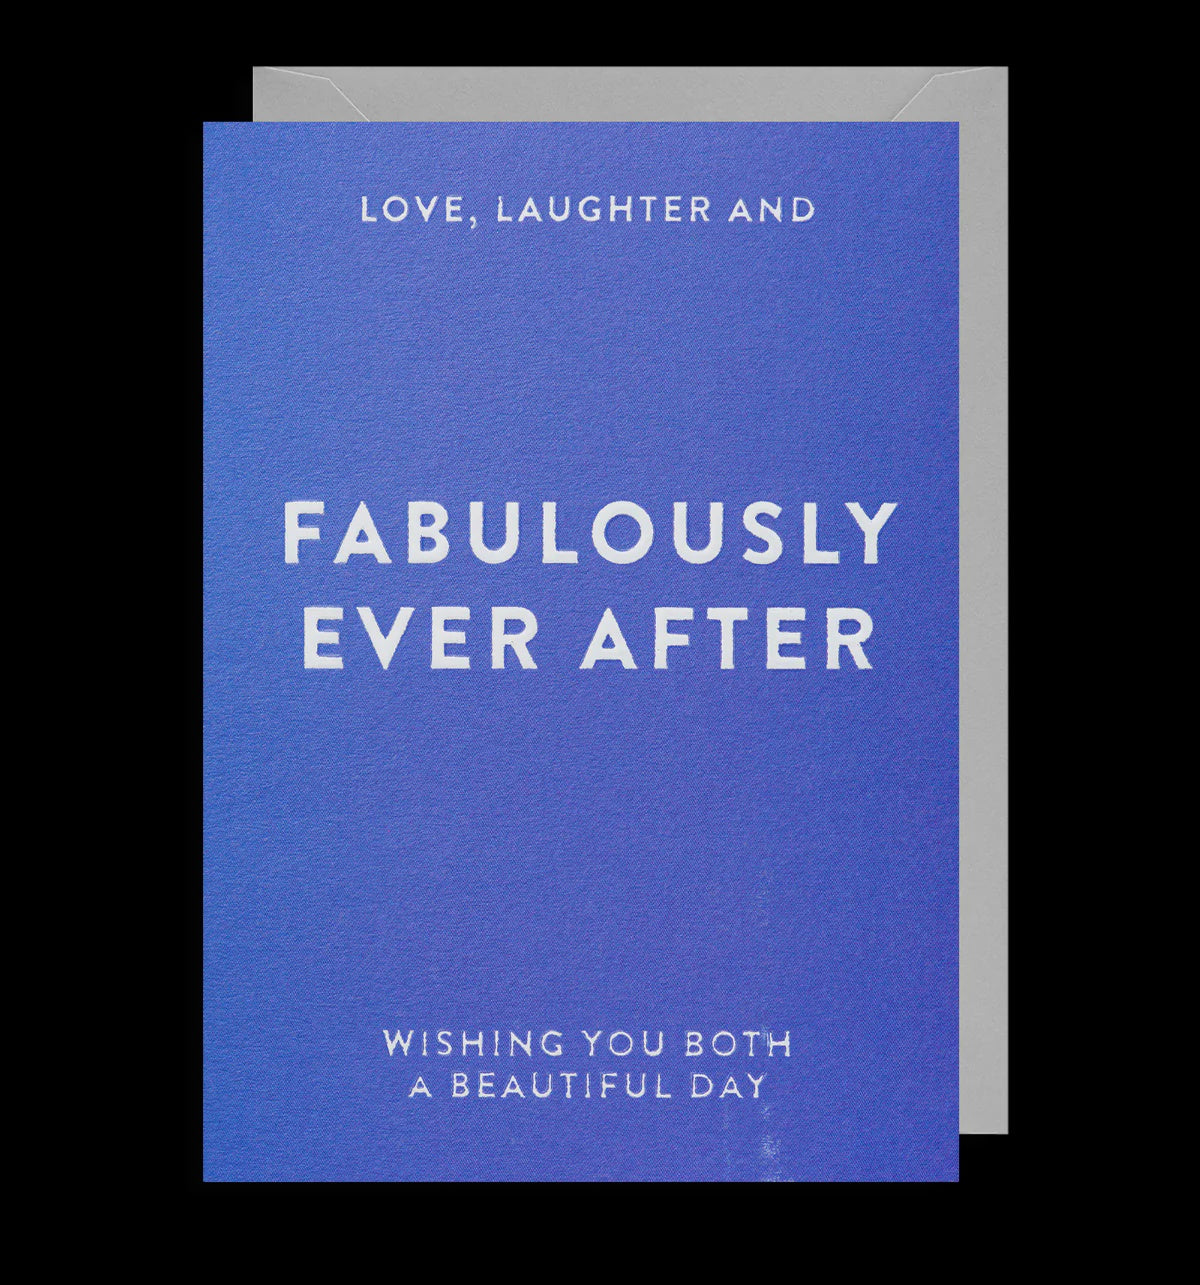 Fabulously Ever After Card